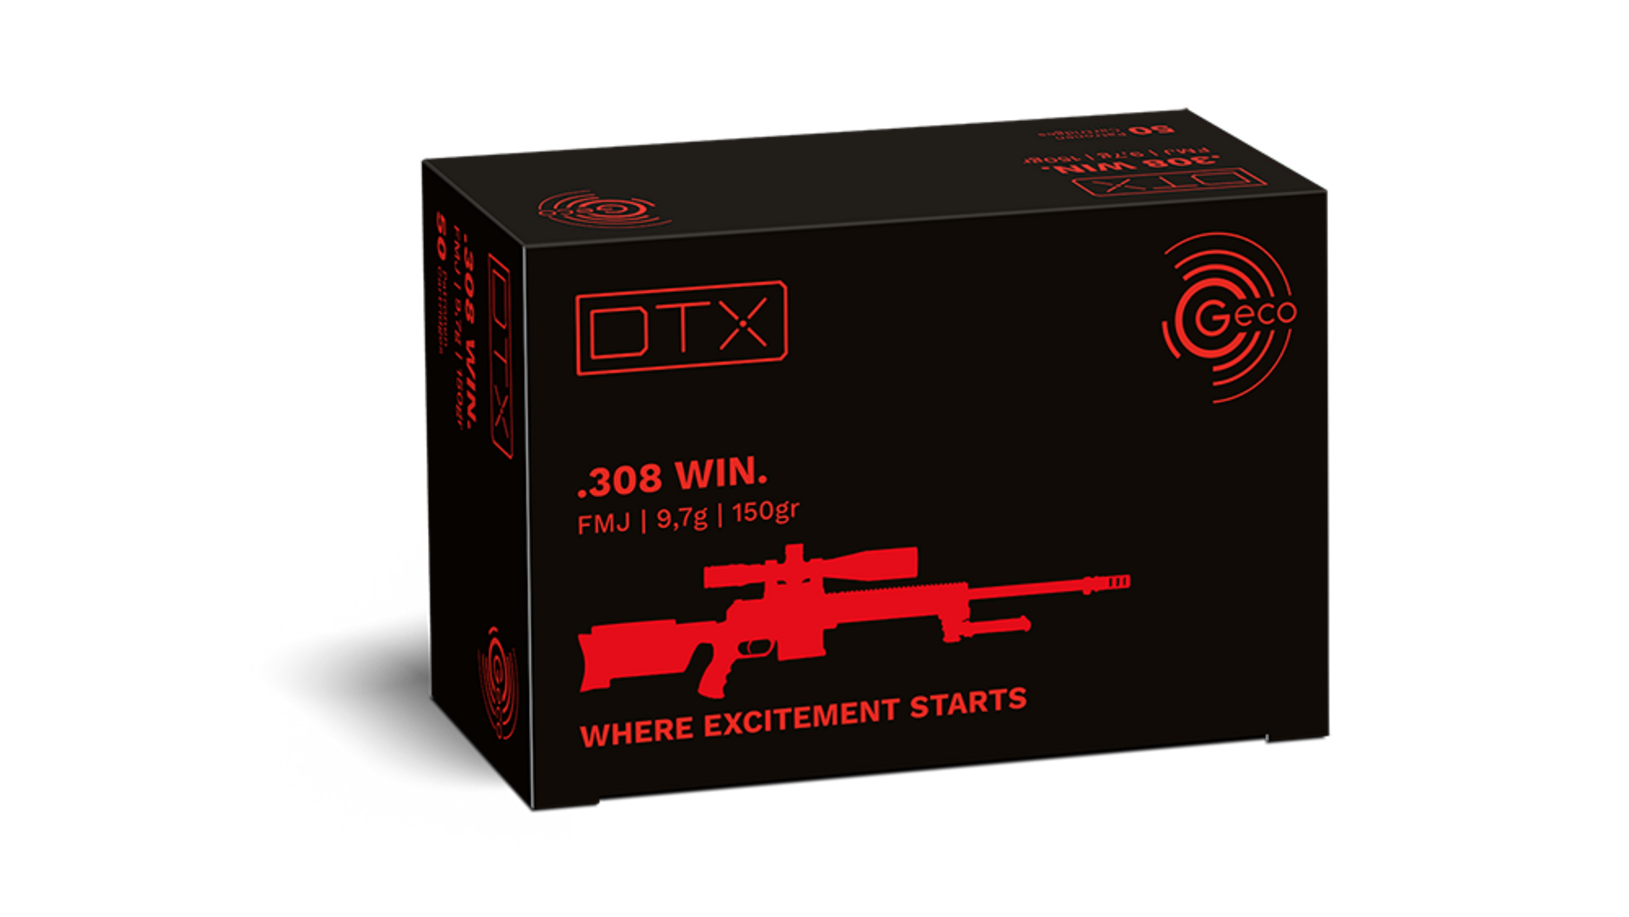 Frontview of packaging of GECO .308 Win. DTX 9,7g